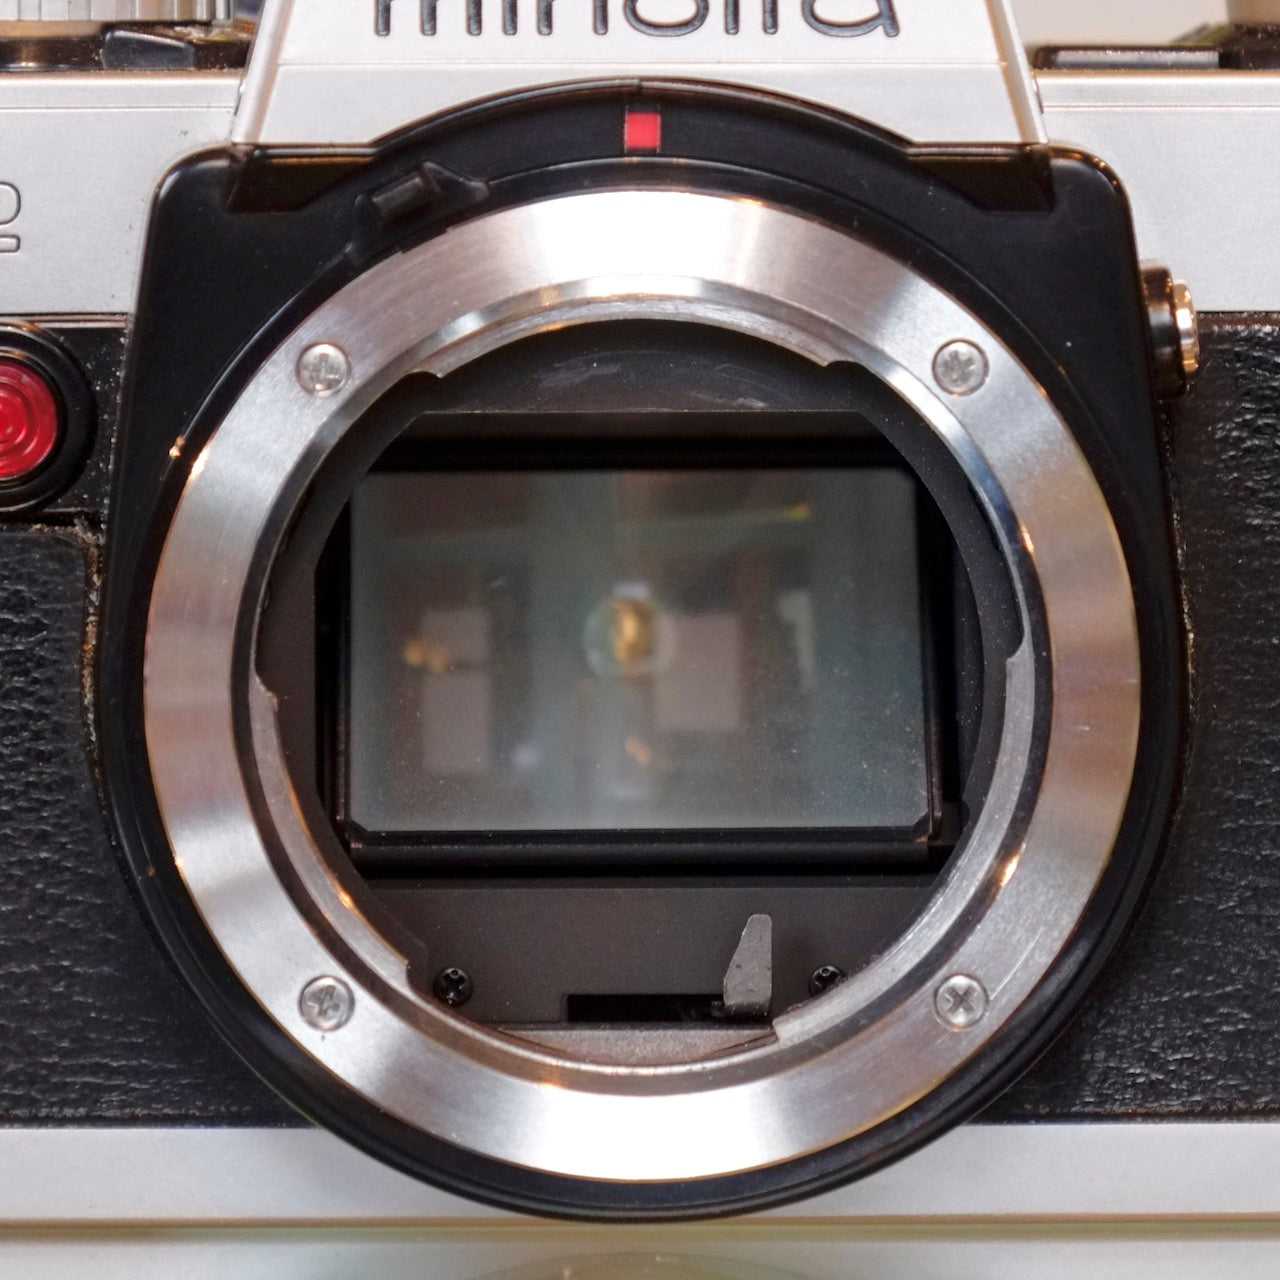 Adapters for Minolta MD mount cameras